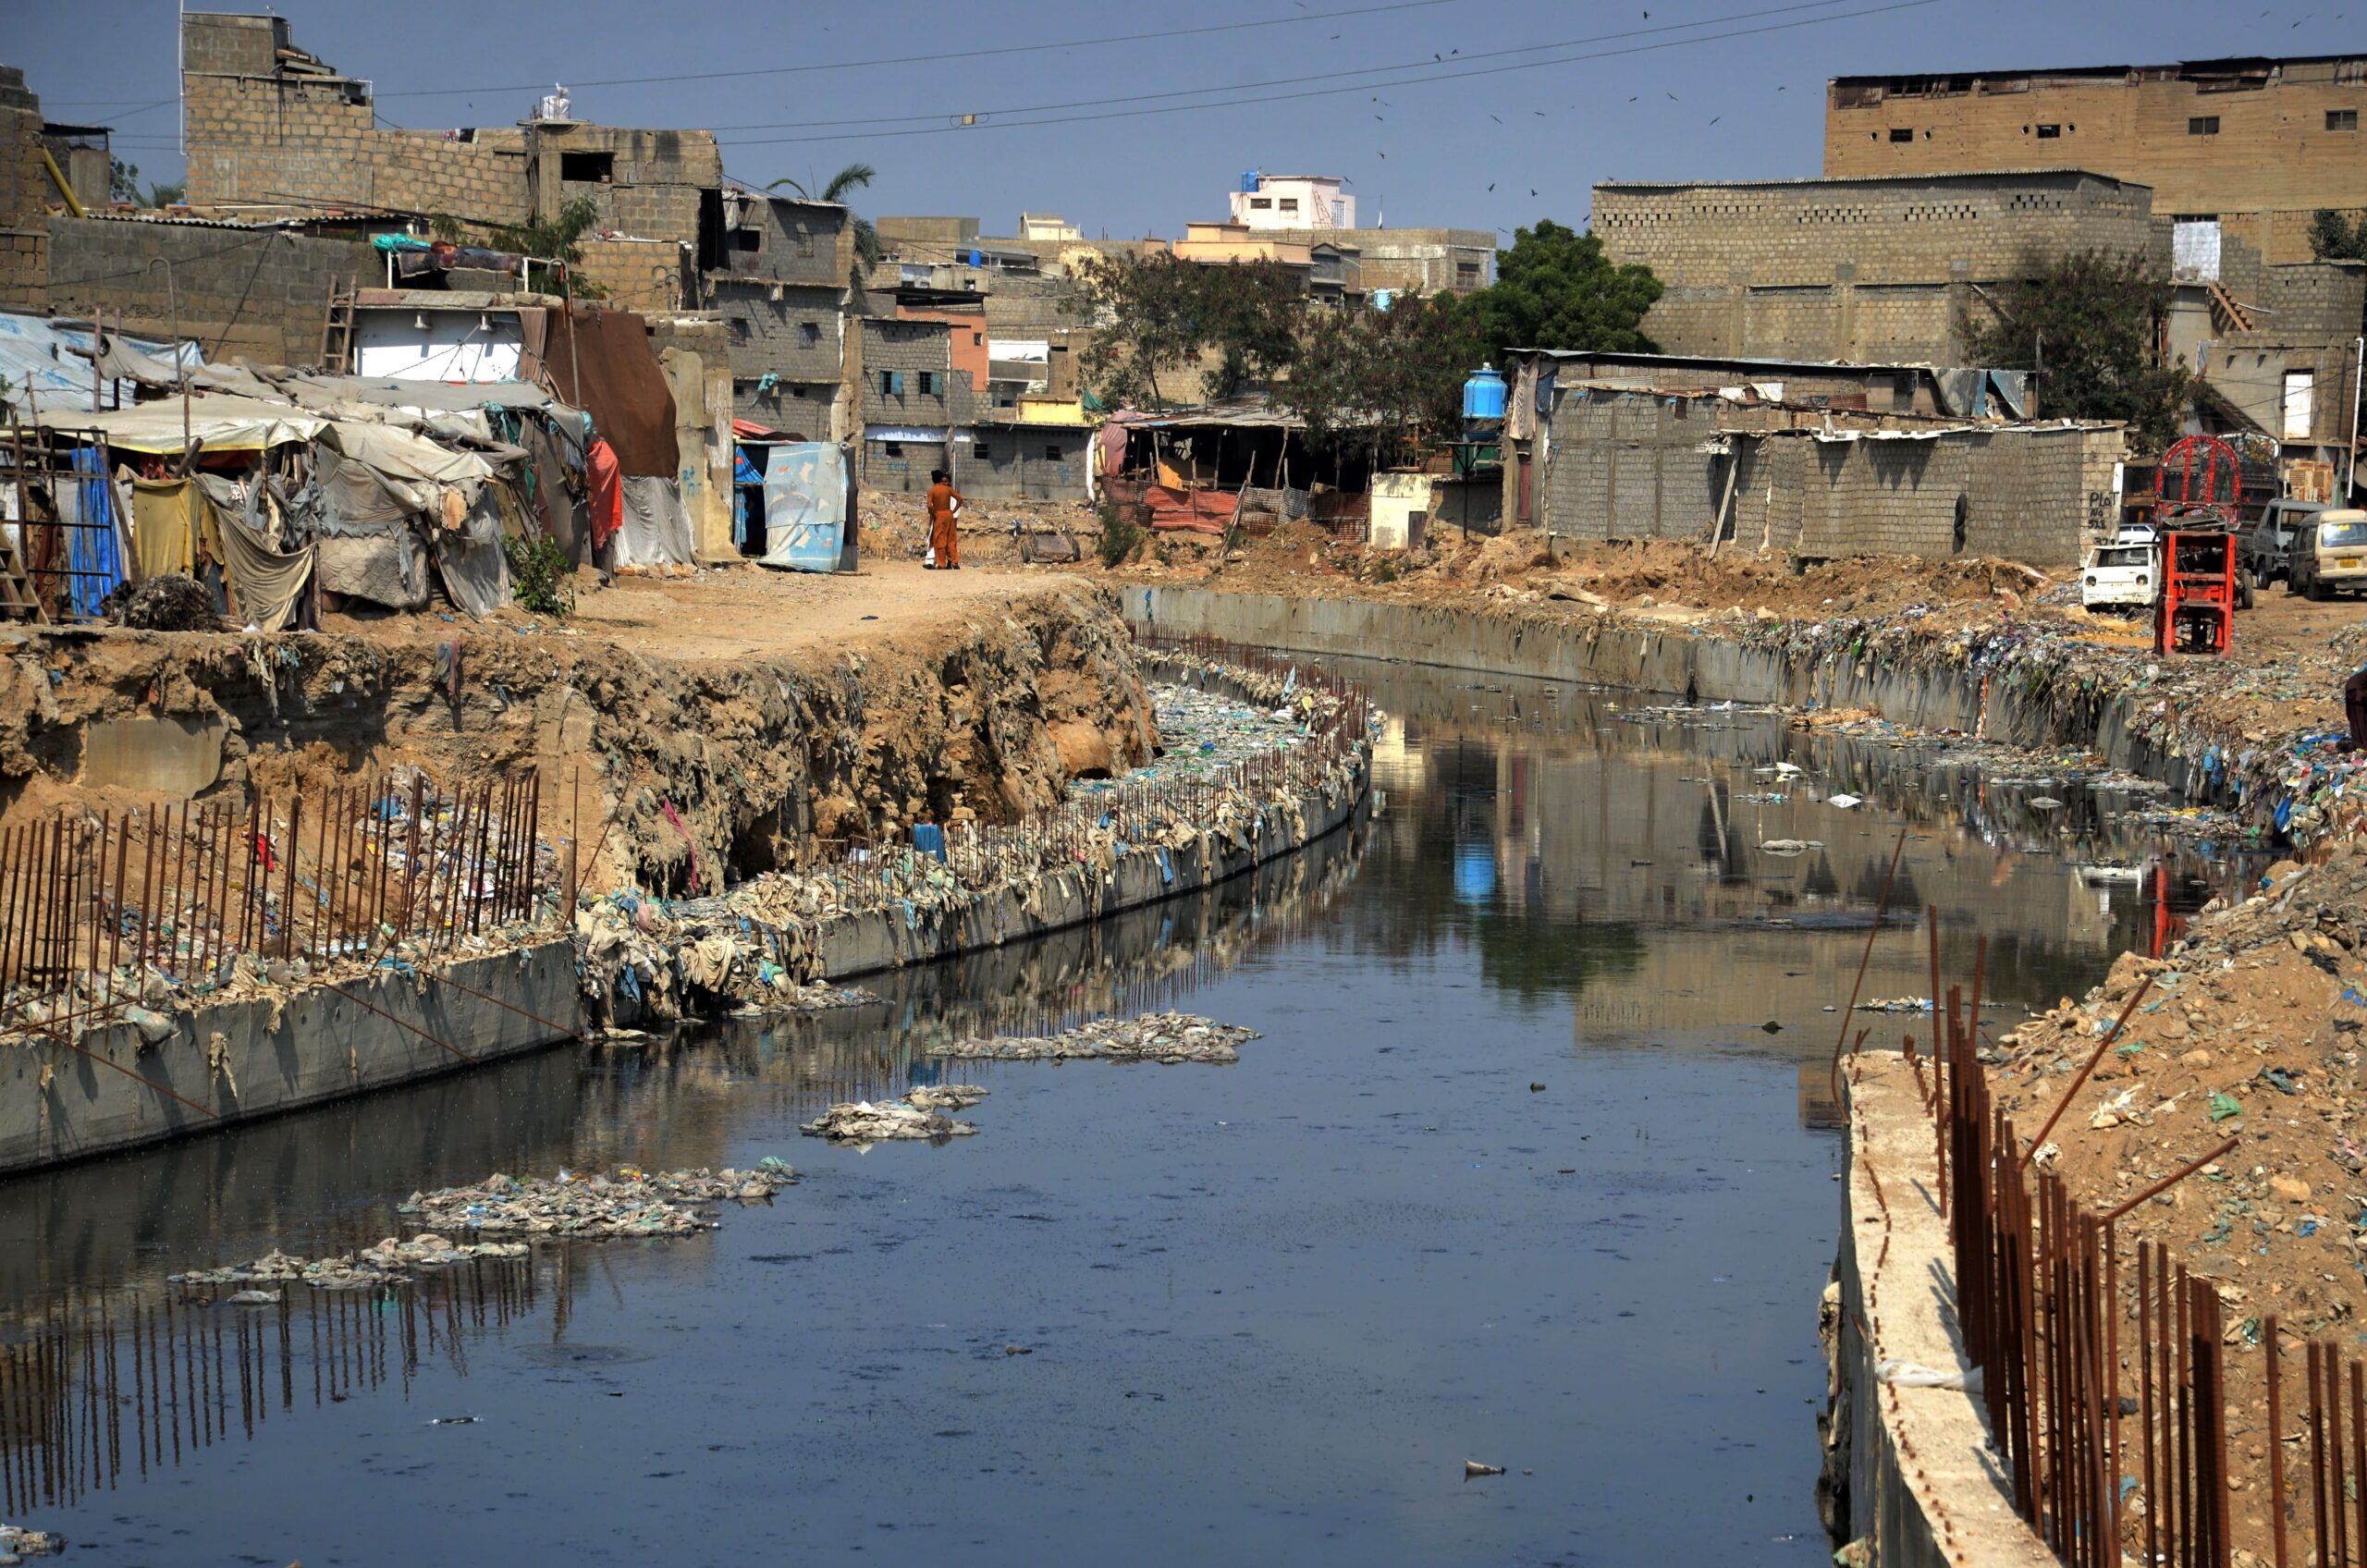 A nullah in Pakistan surrounded by informal settlements typically affected by flooding